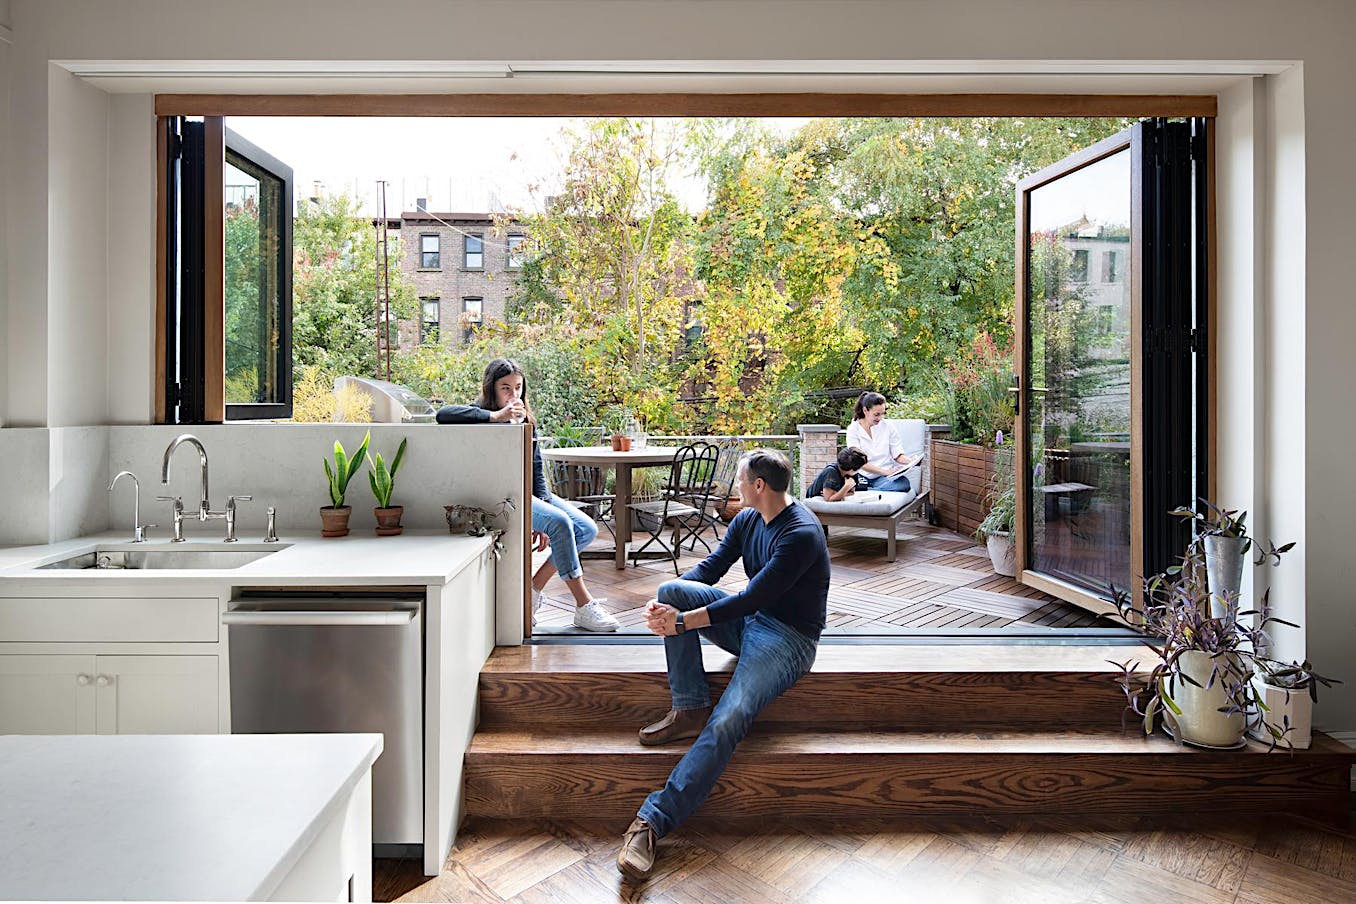 A spacious kitchen with large window door combination opens to an outdoor deck